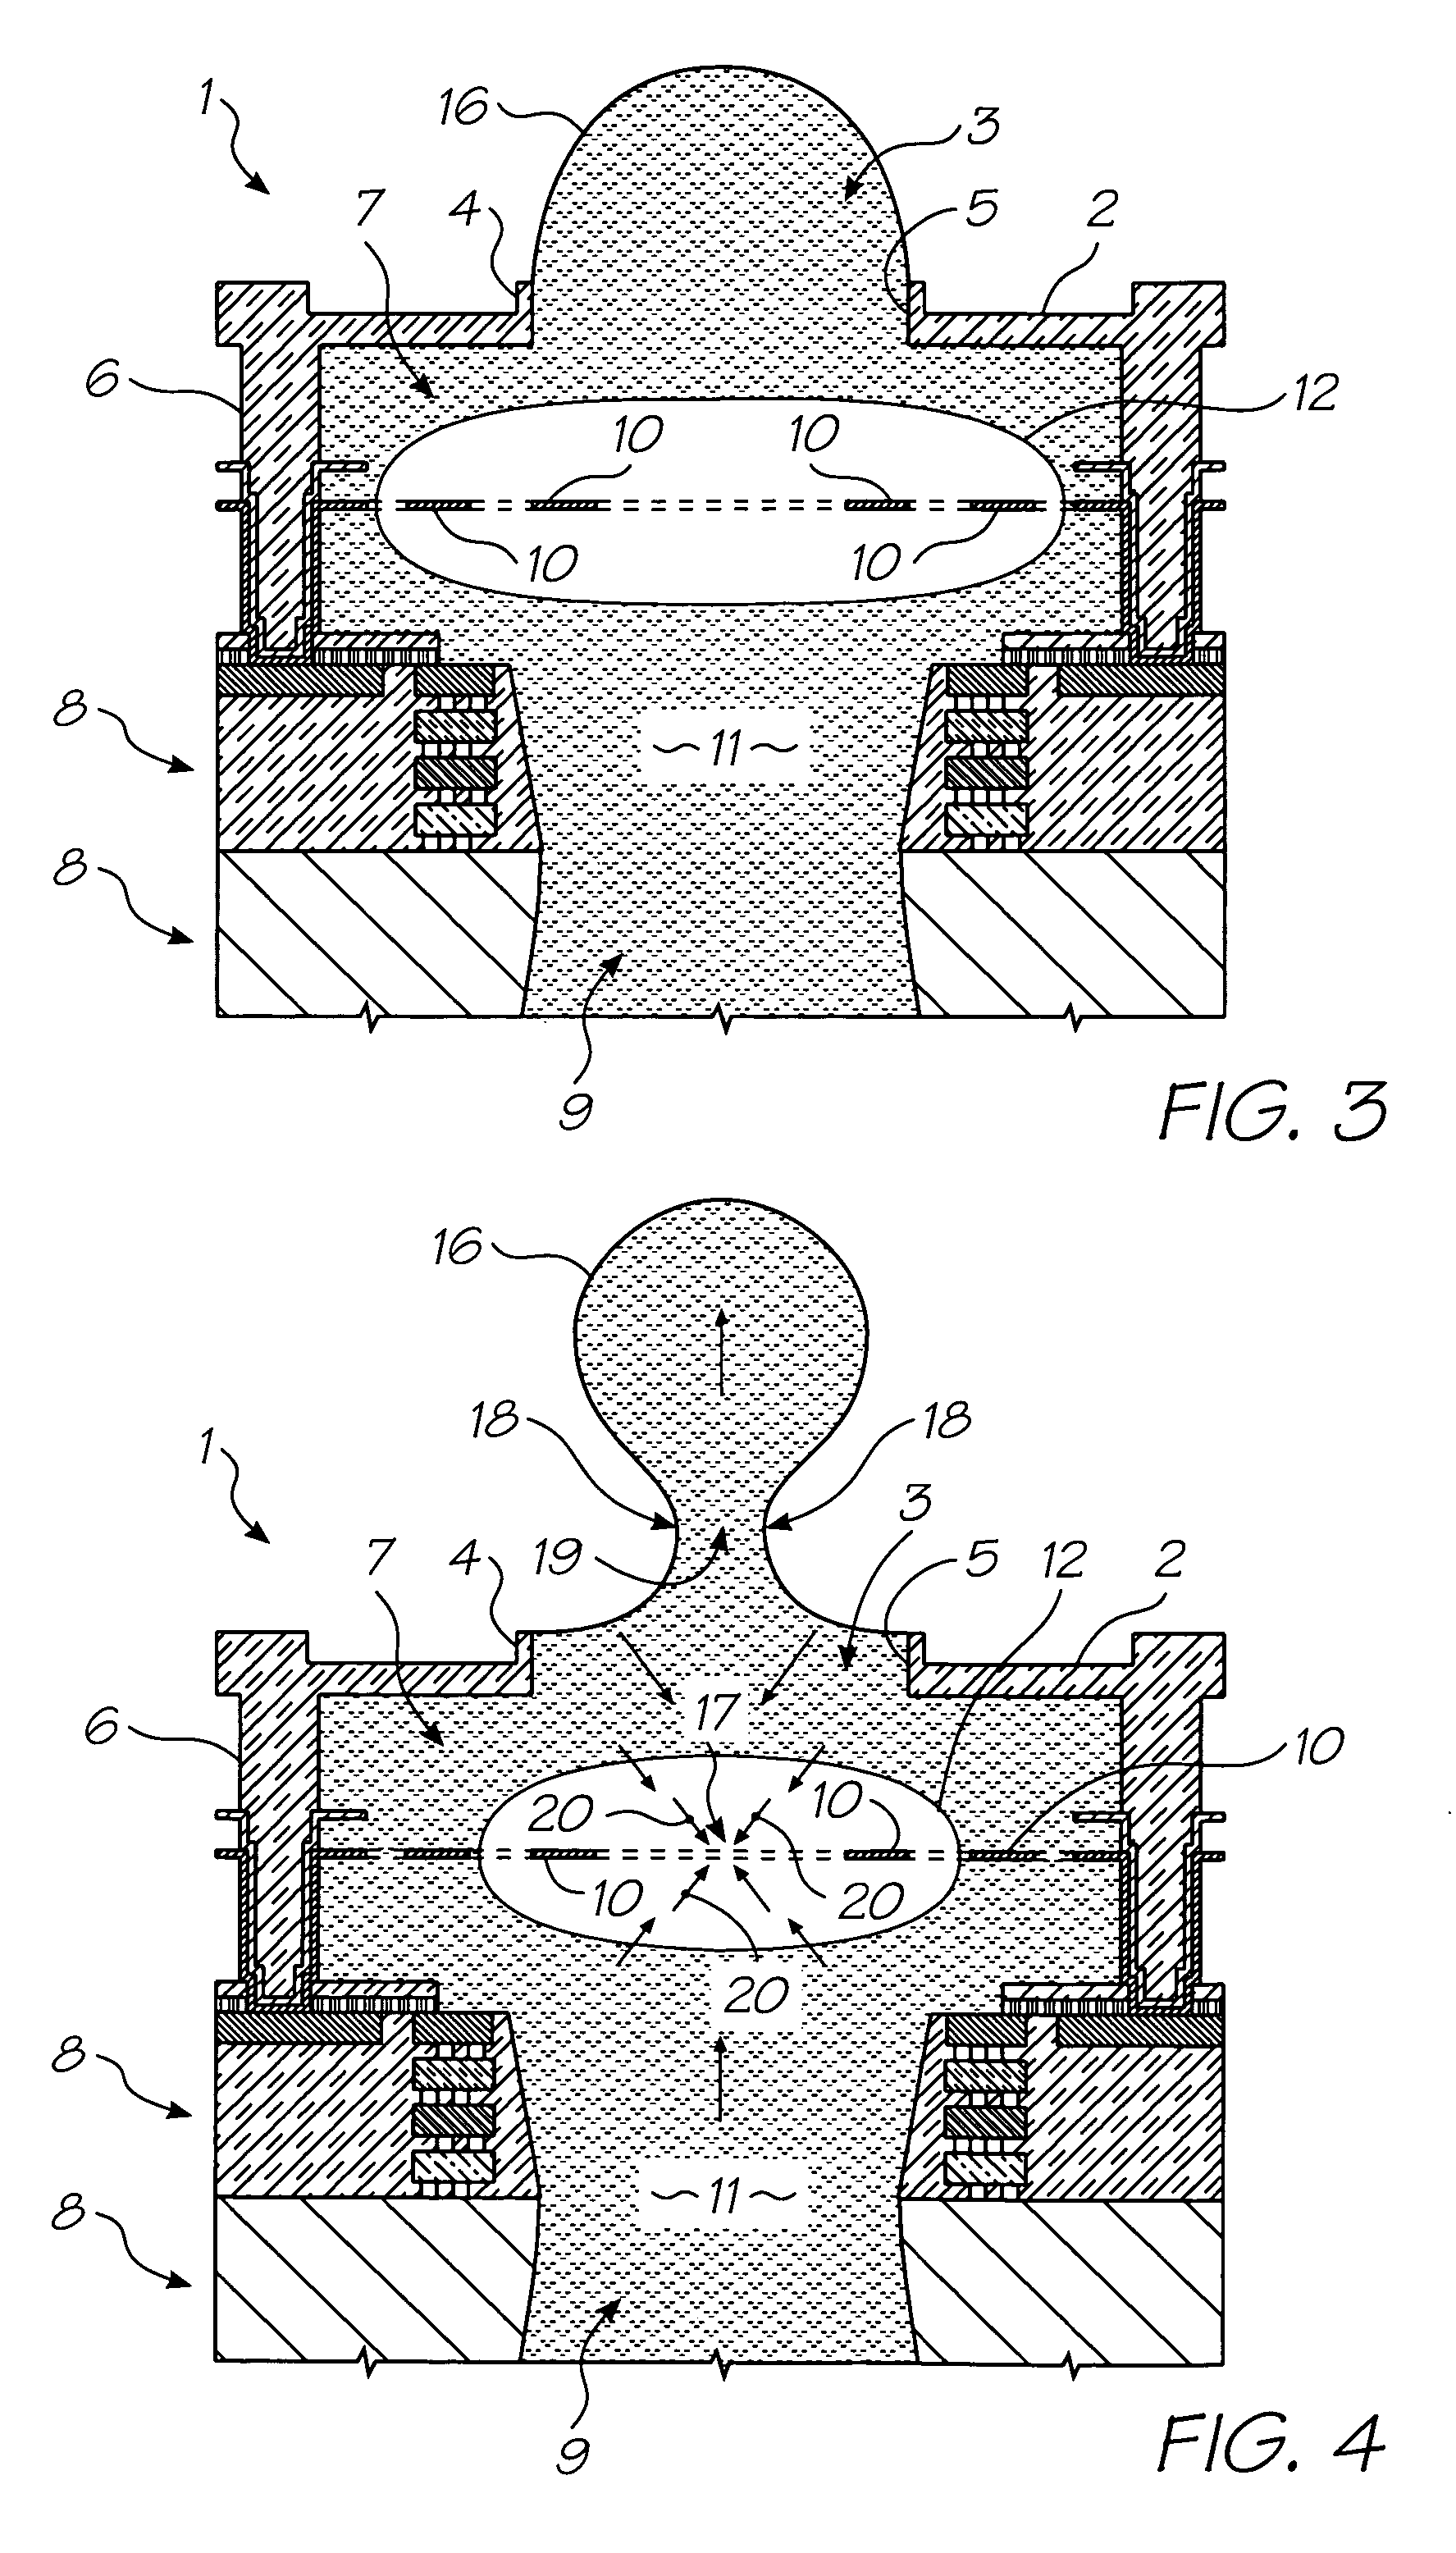 Inkjet printhead heater elements with thin or non-existent coatings